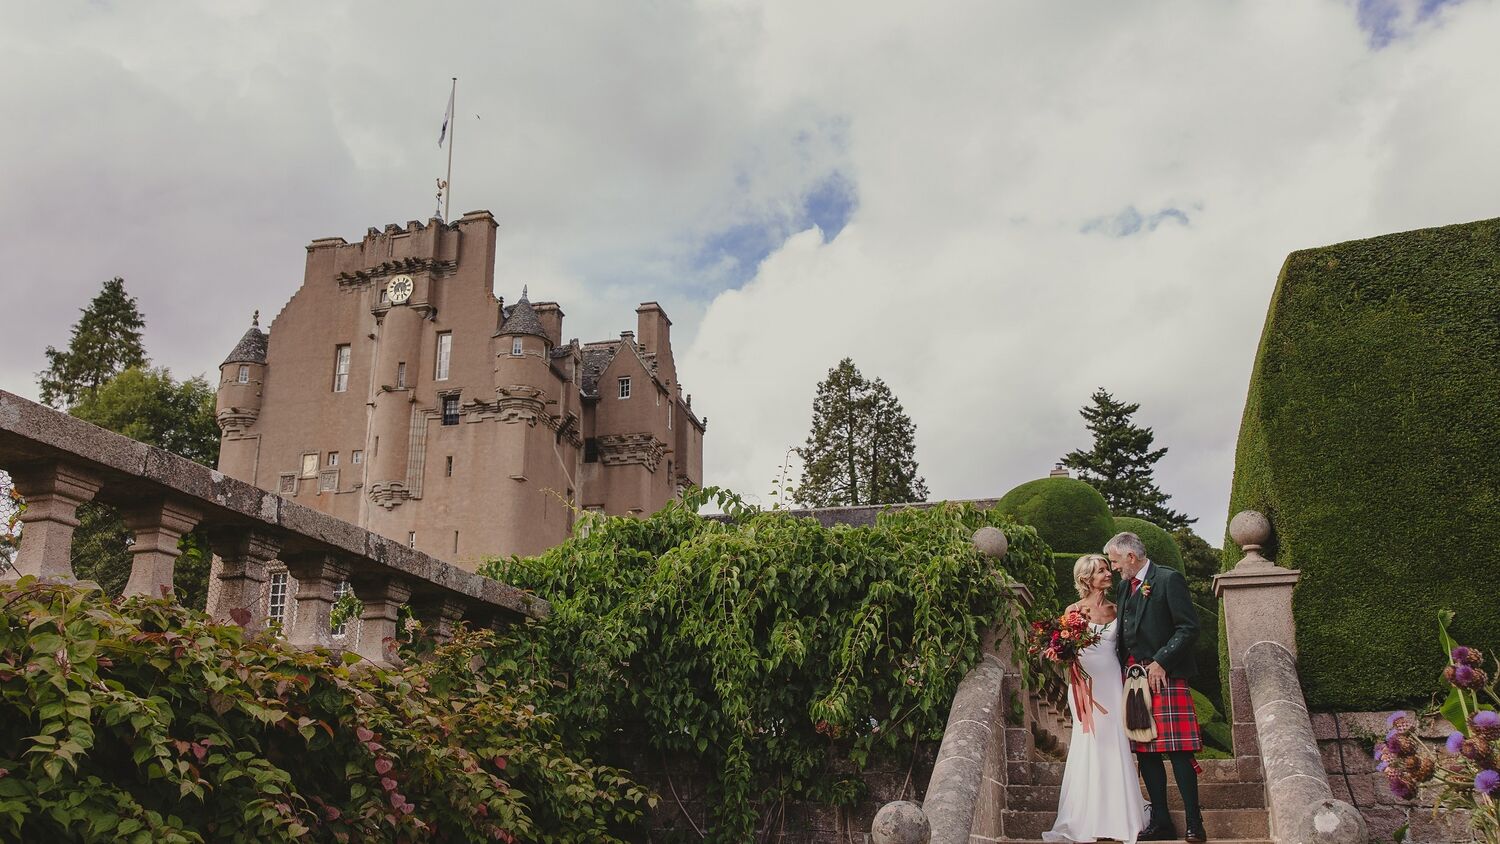 A bride and groom stand on stone garden steps, with Crathes Castle in the background. The groom wears a red kilt. The bride wears a long white dress and is carrying a beautiful bouquet of red and orange flowers.